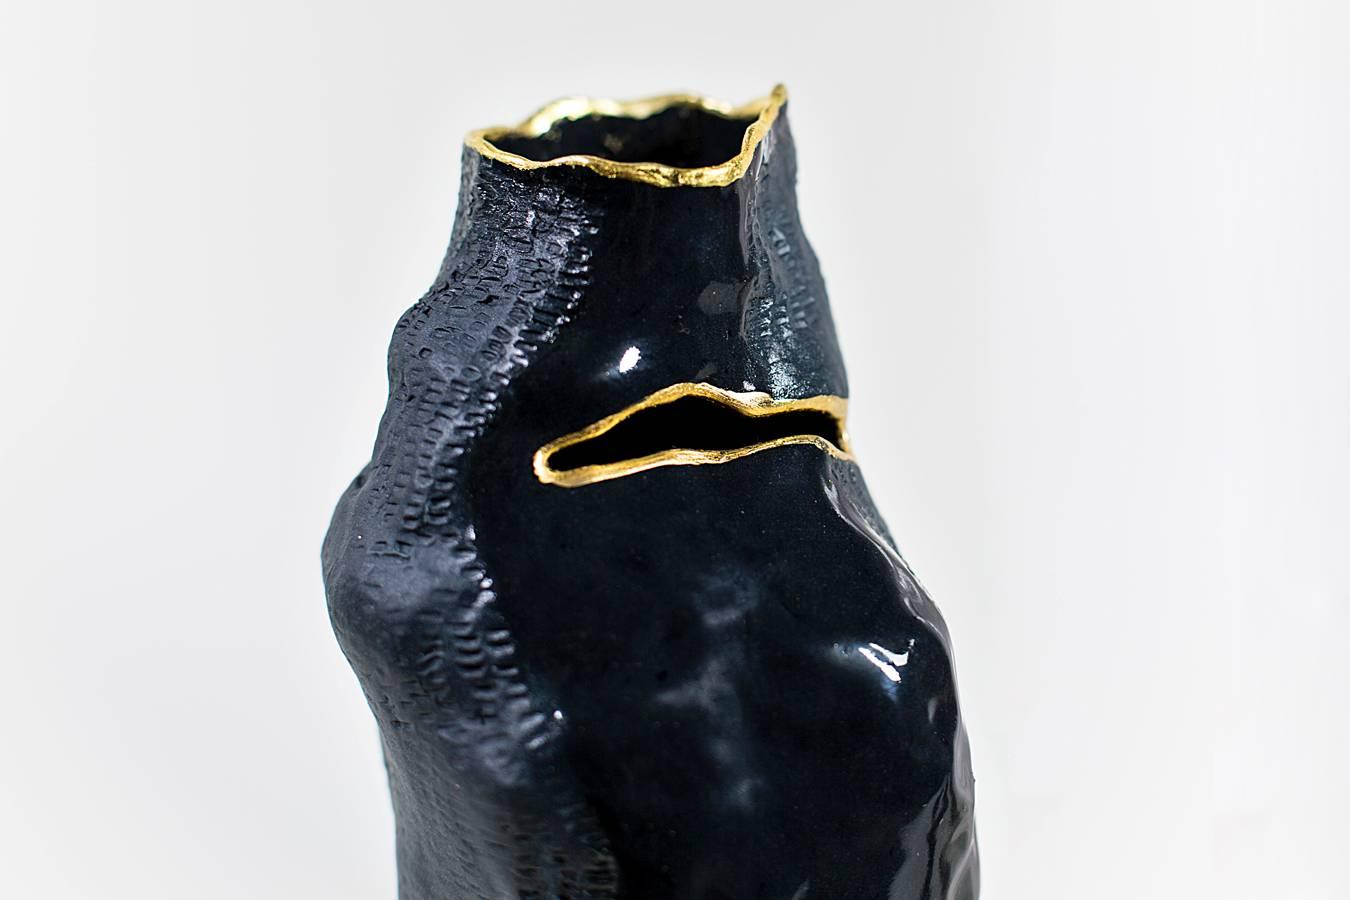 This handbuilt one-of-a-kind ceramic vase is hand built with stained English Porcelain and a delicate 23-karat gold leaf detail is applied with ormolu technique. 
This piece features a combination of unglazed and glazed (clear) finishes, textured